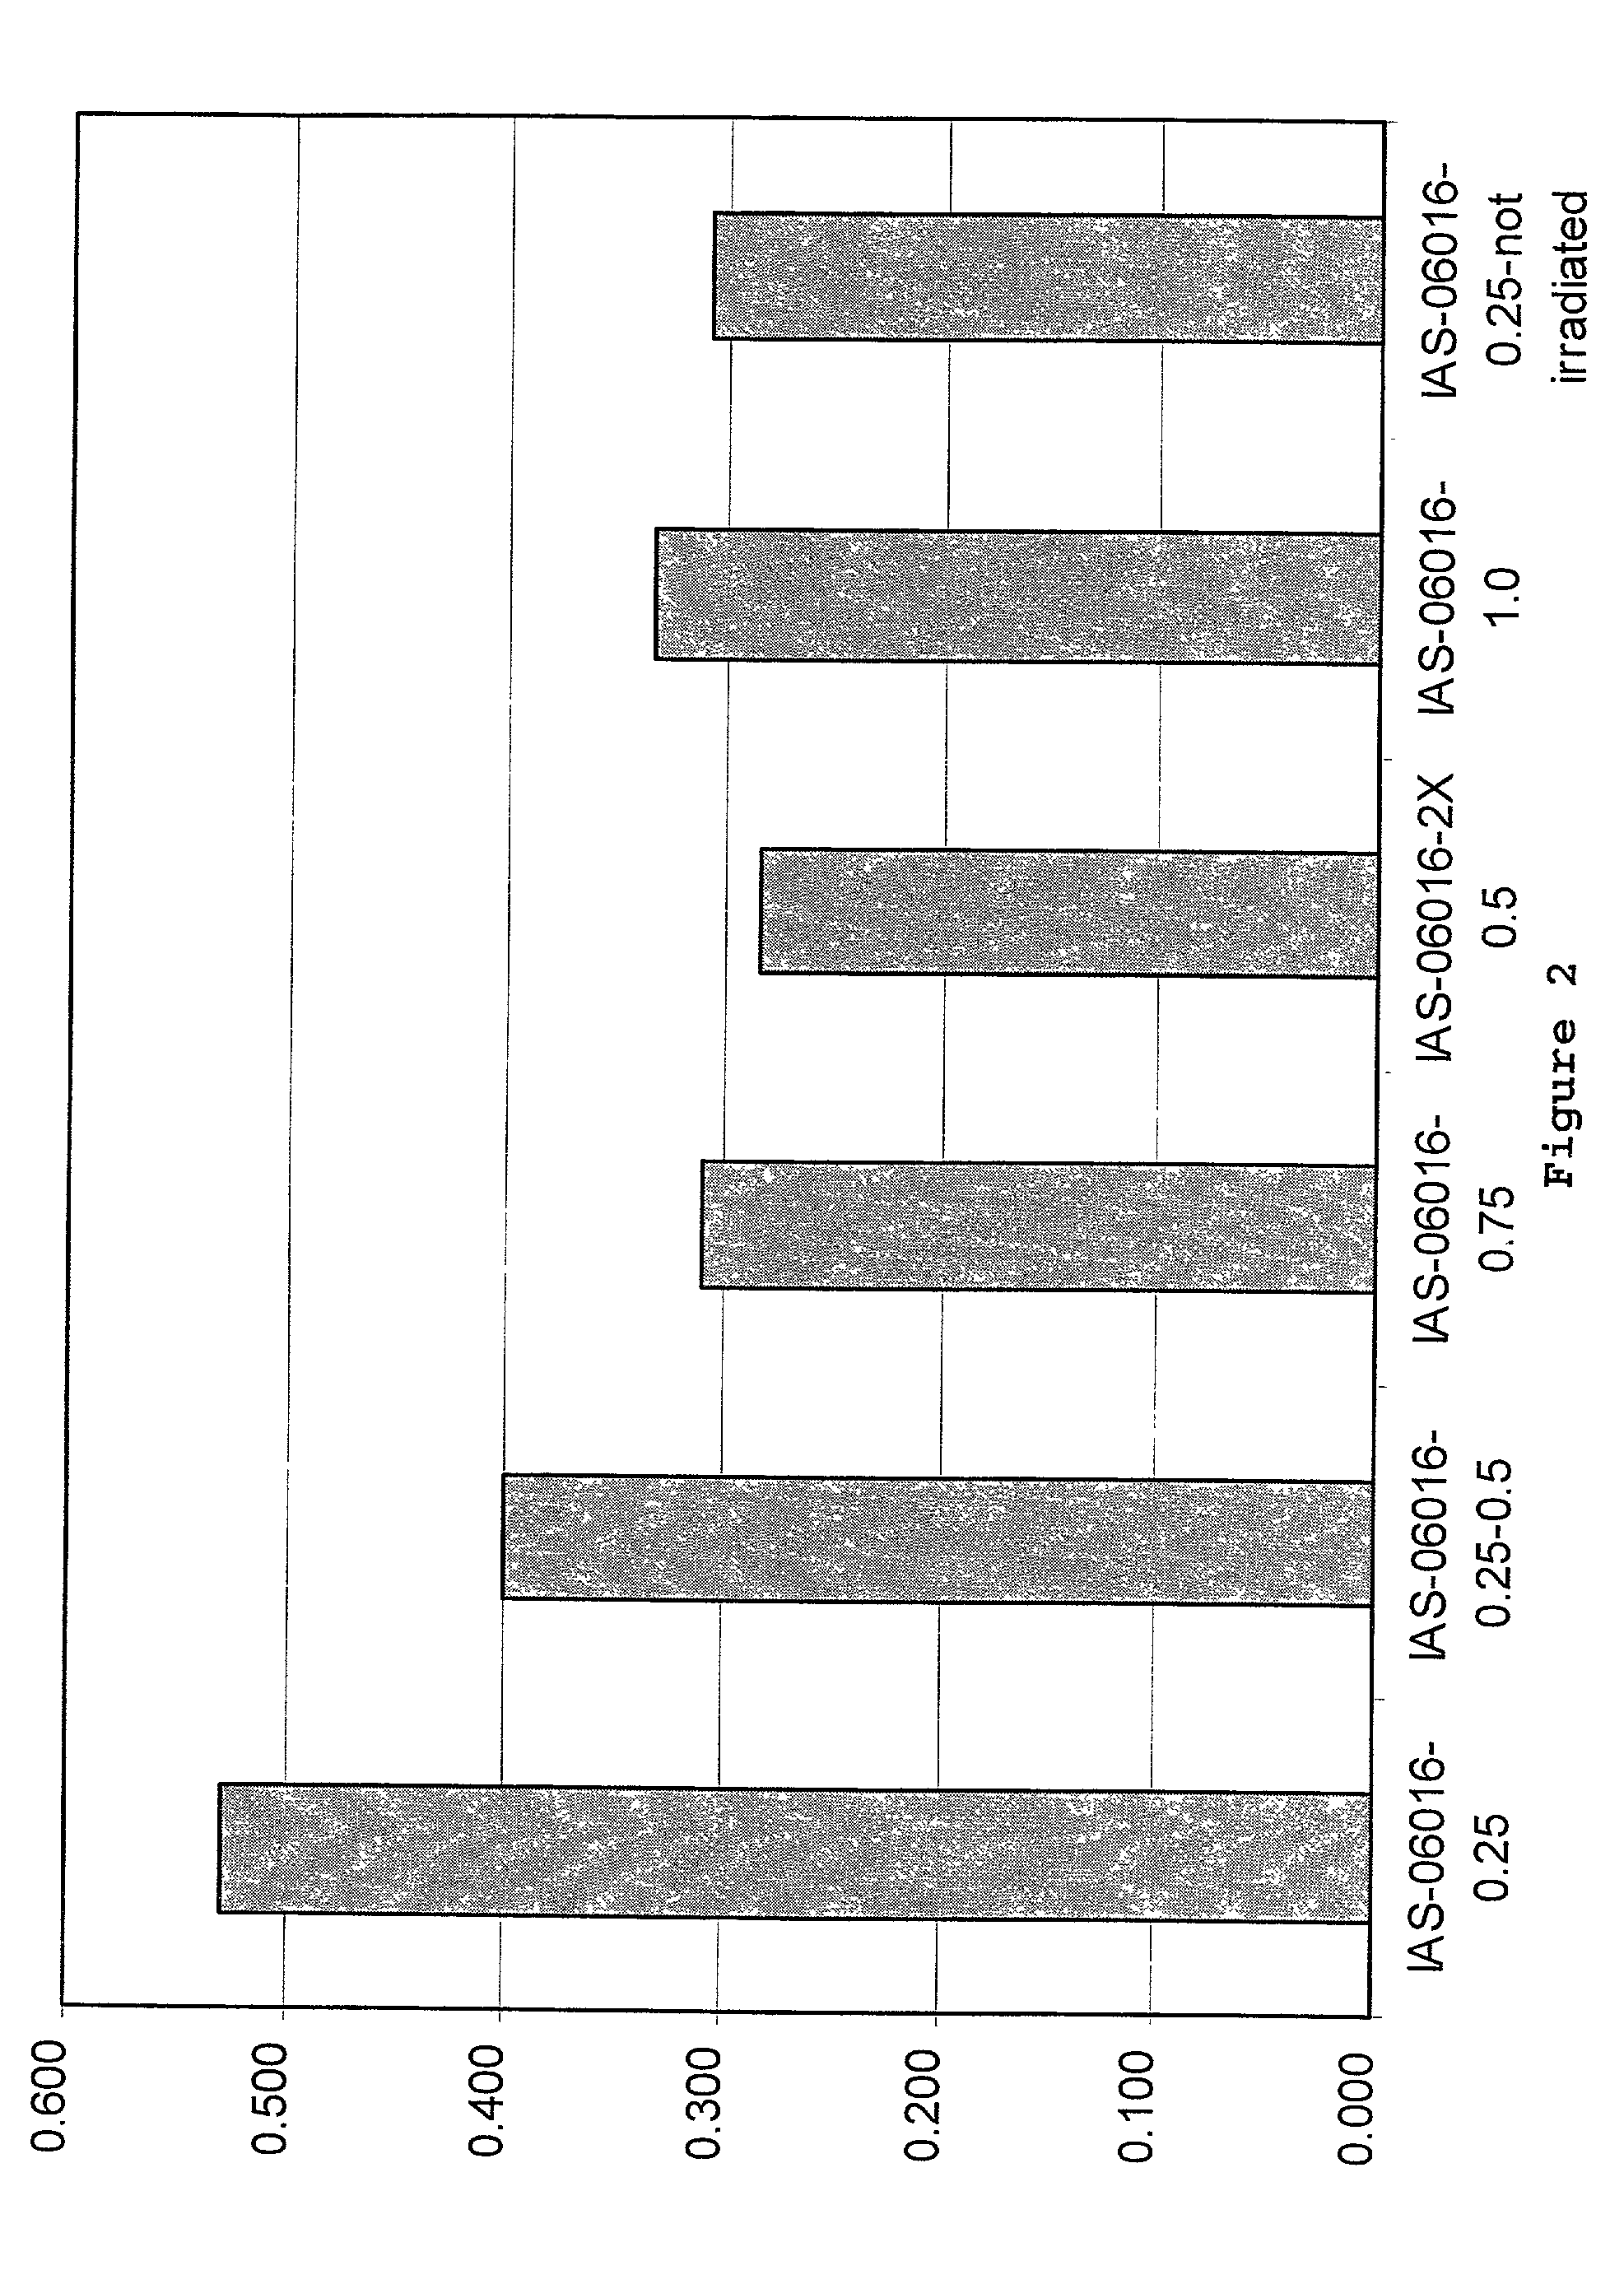 Collagen/glycosaminoglycan matrix stable to sterilizing by electron beam radiation